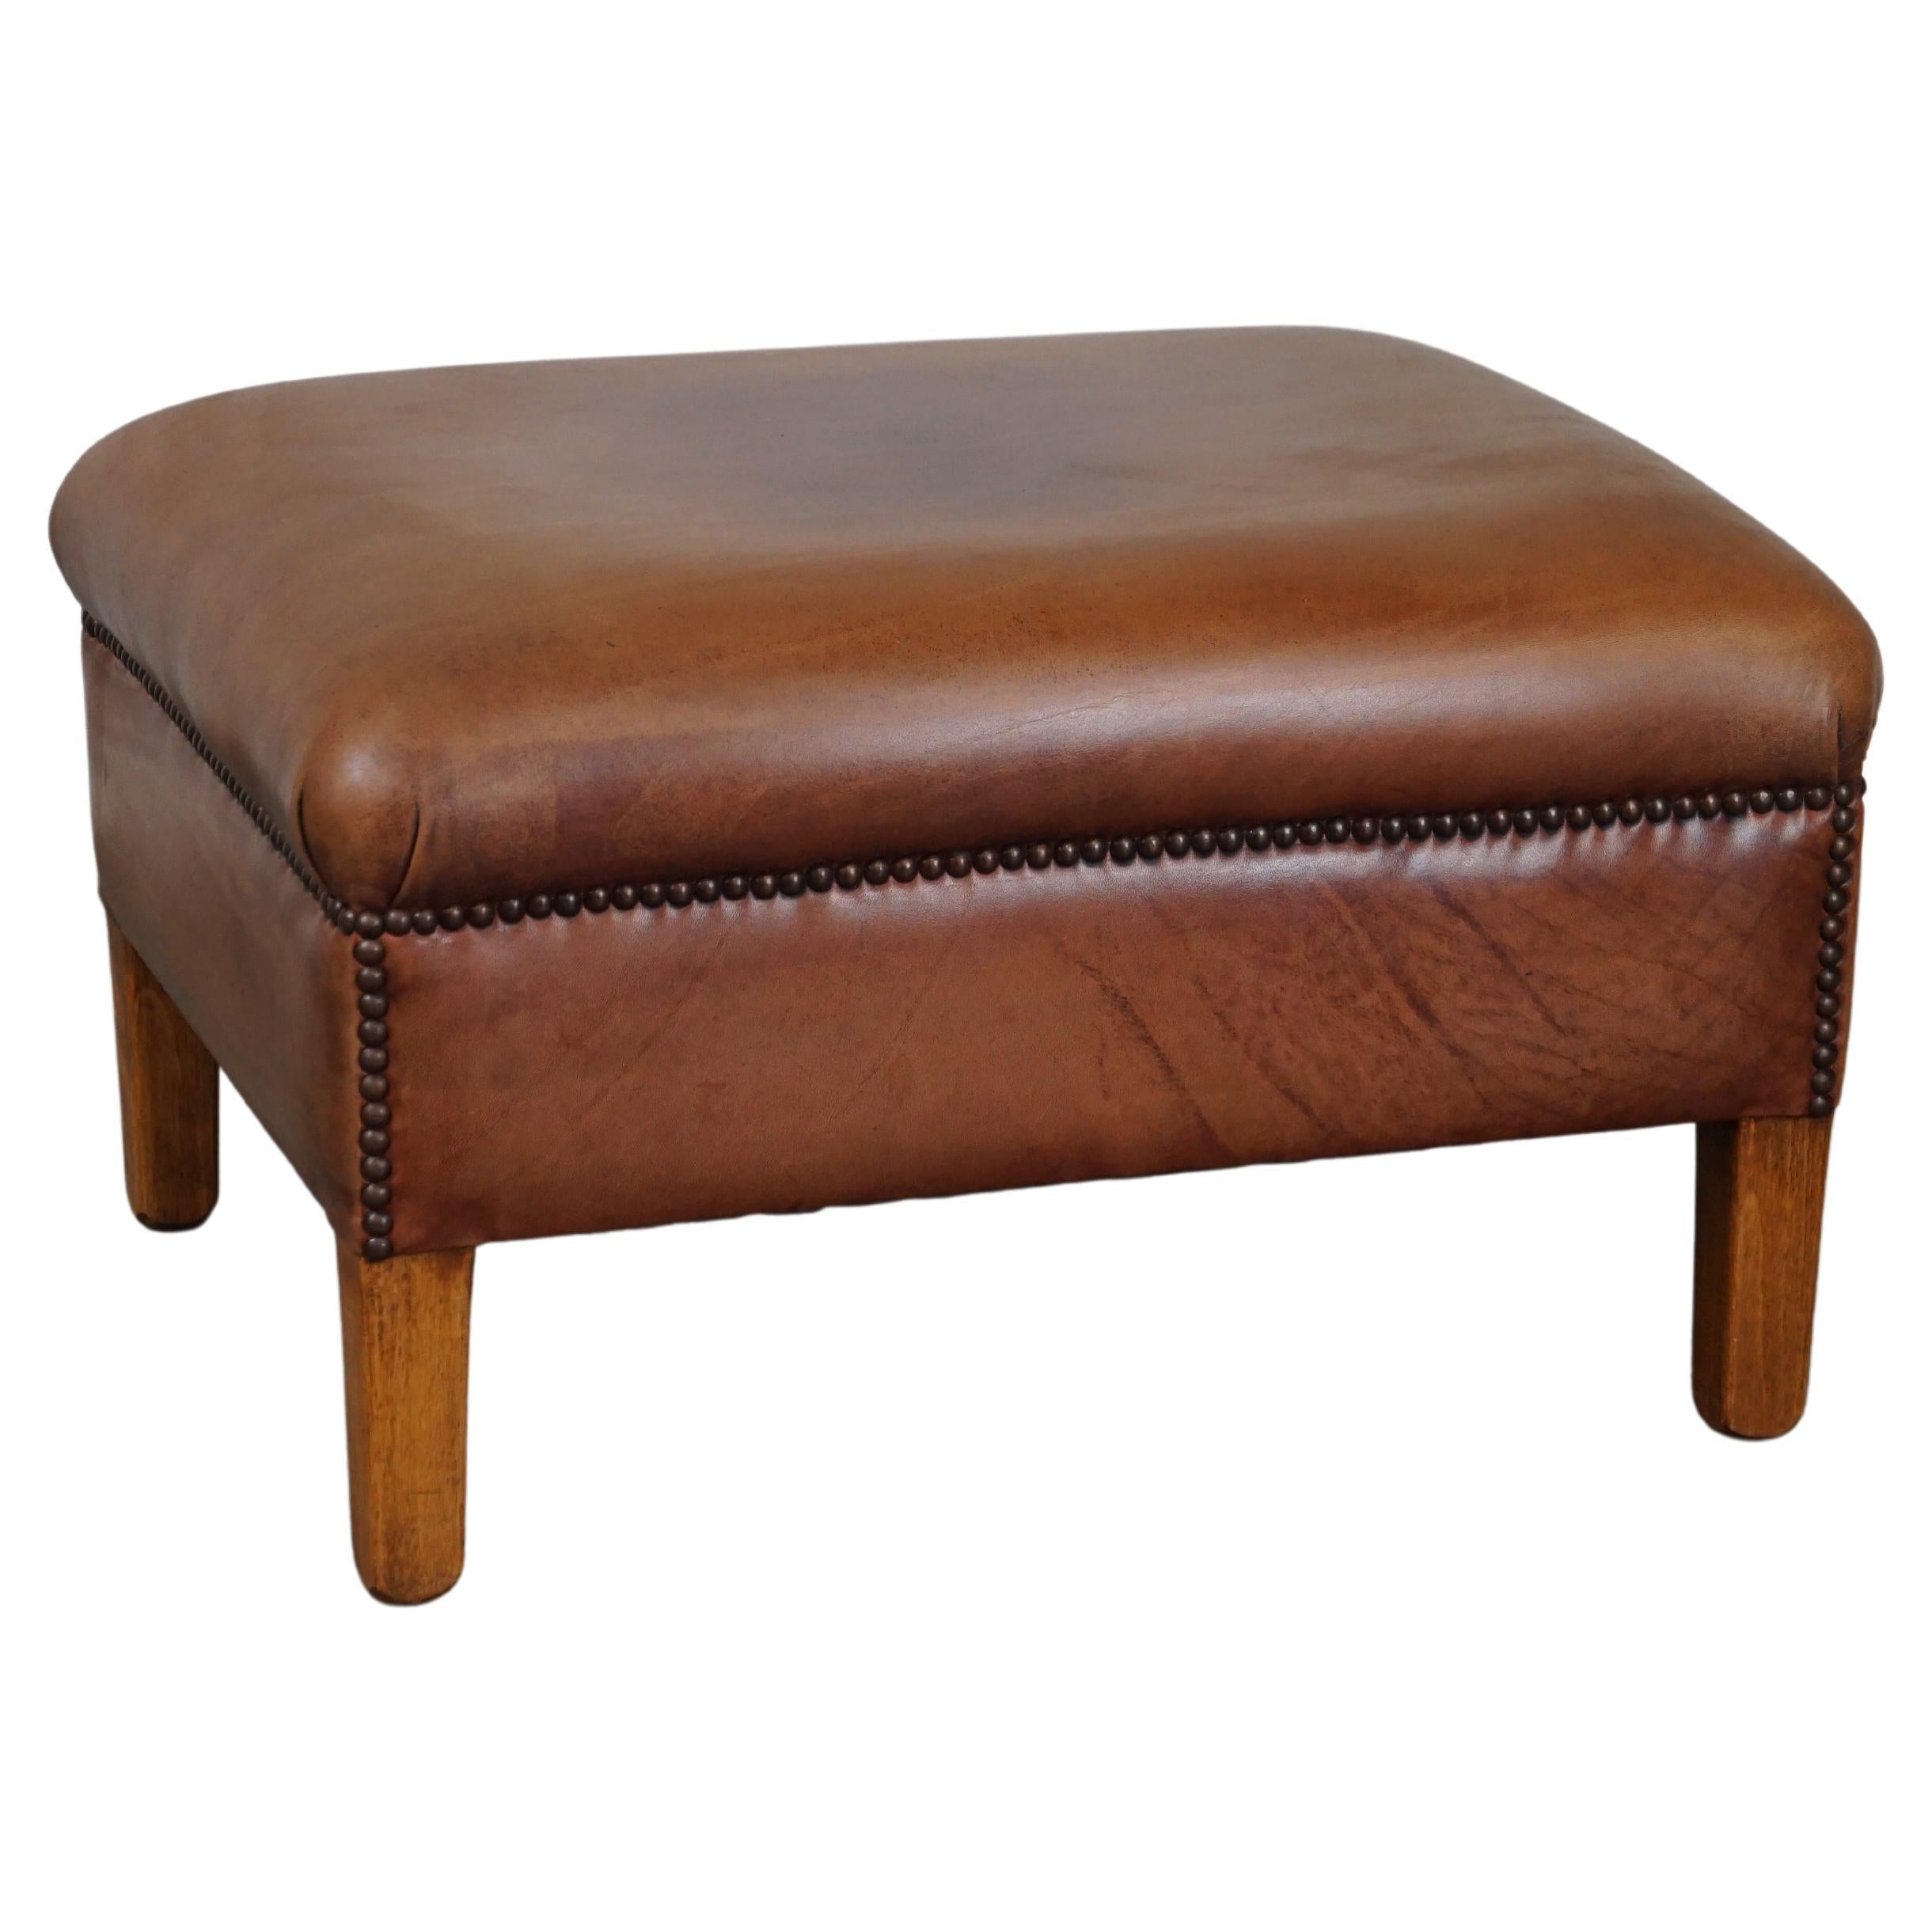 English-style leather ottoman in cognac-colored leather.